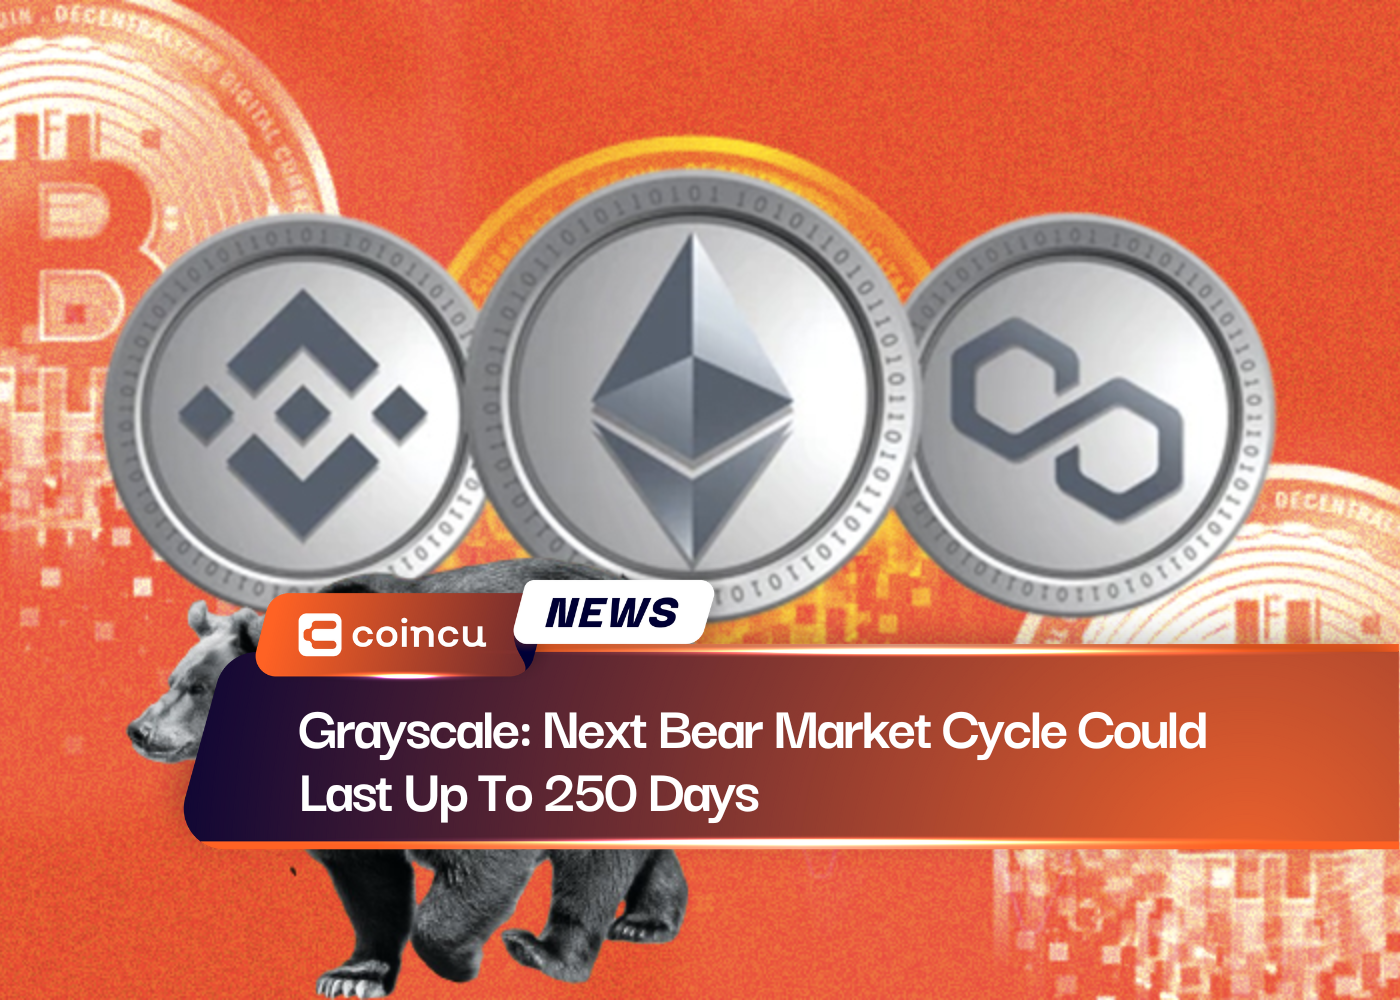 Grayscale: Next Bear Market Cycle Could Last Up To 250 Days